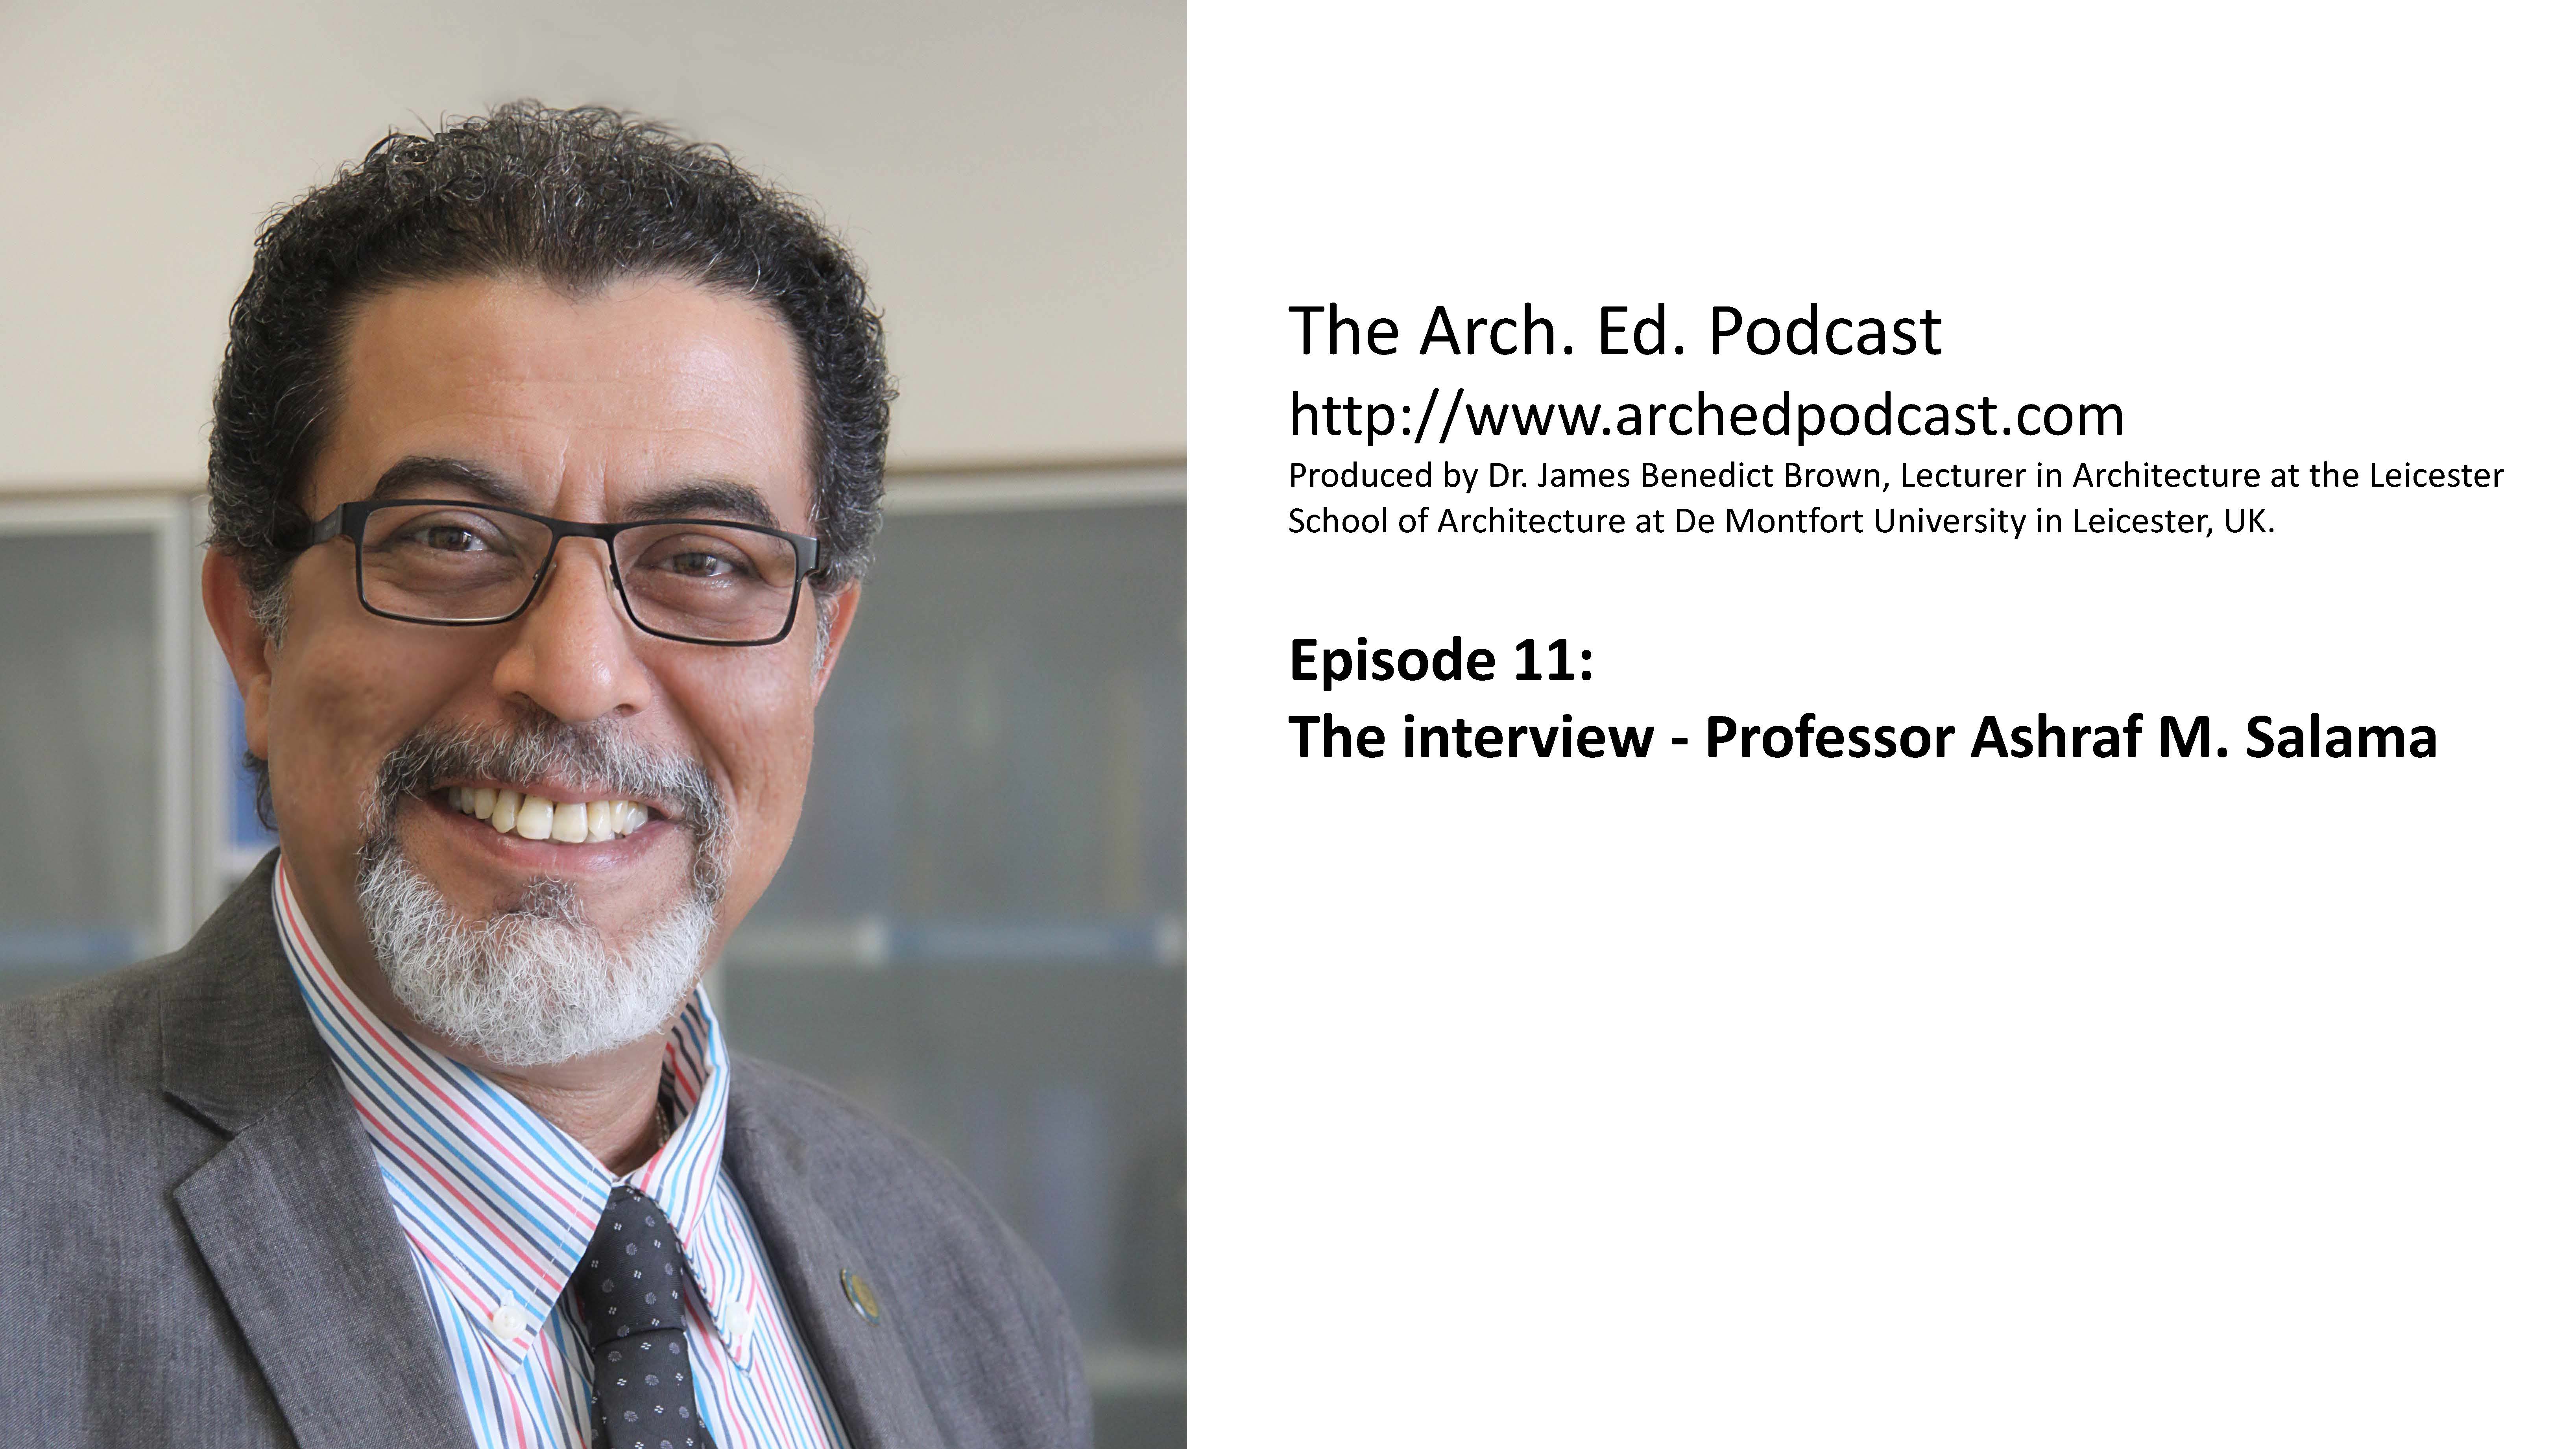 James Benedict Brown - Professor Ashraf Salama discusses <a data-bypass="true" target="_blank" href="http://www.archedpodcast.com/listen/DAY/MONTH/2015/episode-10-the-interview-professor-ashraf-salama">pedagogy in architectural history and design on Arch. Ed. Podcast</a>, with Dr. James Benedict Brown, Lecturer, Leicester School of Architecture.